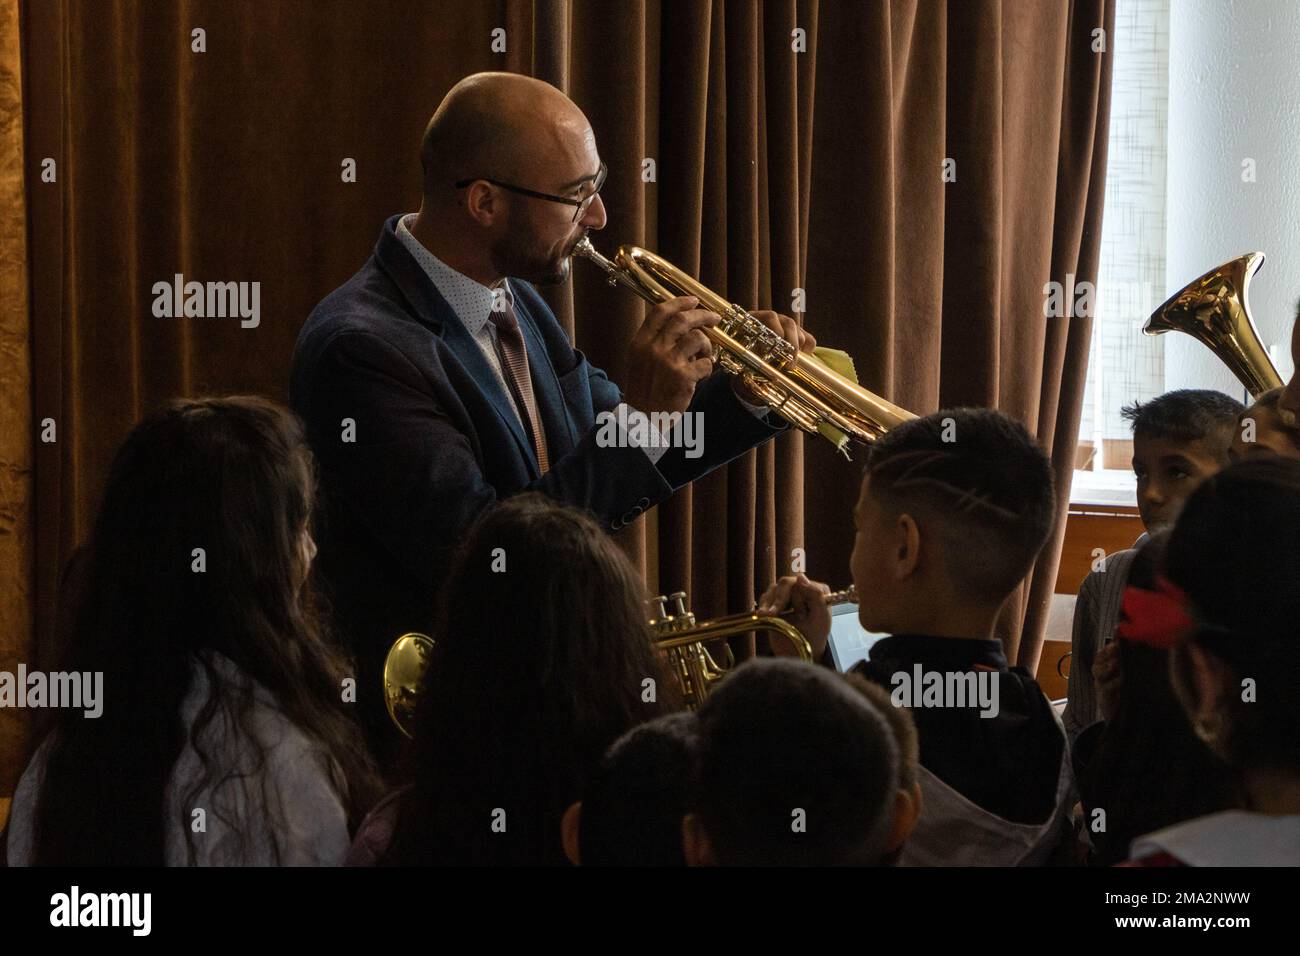 Denis Gonsalvesh, deputy mayor of Nessebar for Public Order, Youth Activities and Sport,  plays the flugelhorn to demonstrate how to play brass instruments and to help foster an appreciation of music and fine arts for the students attending Georgi Rakovski Primary School in Orizare, Bulgaria, May 23, 2022. Georgi Rakovski Primary School is constantly renewing and modernizing while remaining a methodological center where children are educated in a modern environment combining innovative and traditional methods. Bulgaria is a steadfast and gracious host to its partners and allies, and the U.S. i Stock Photo